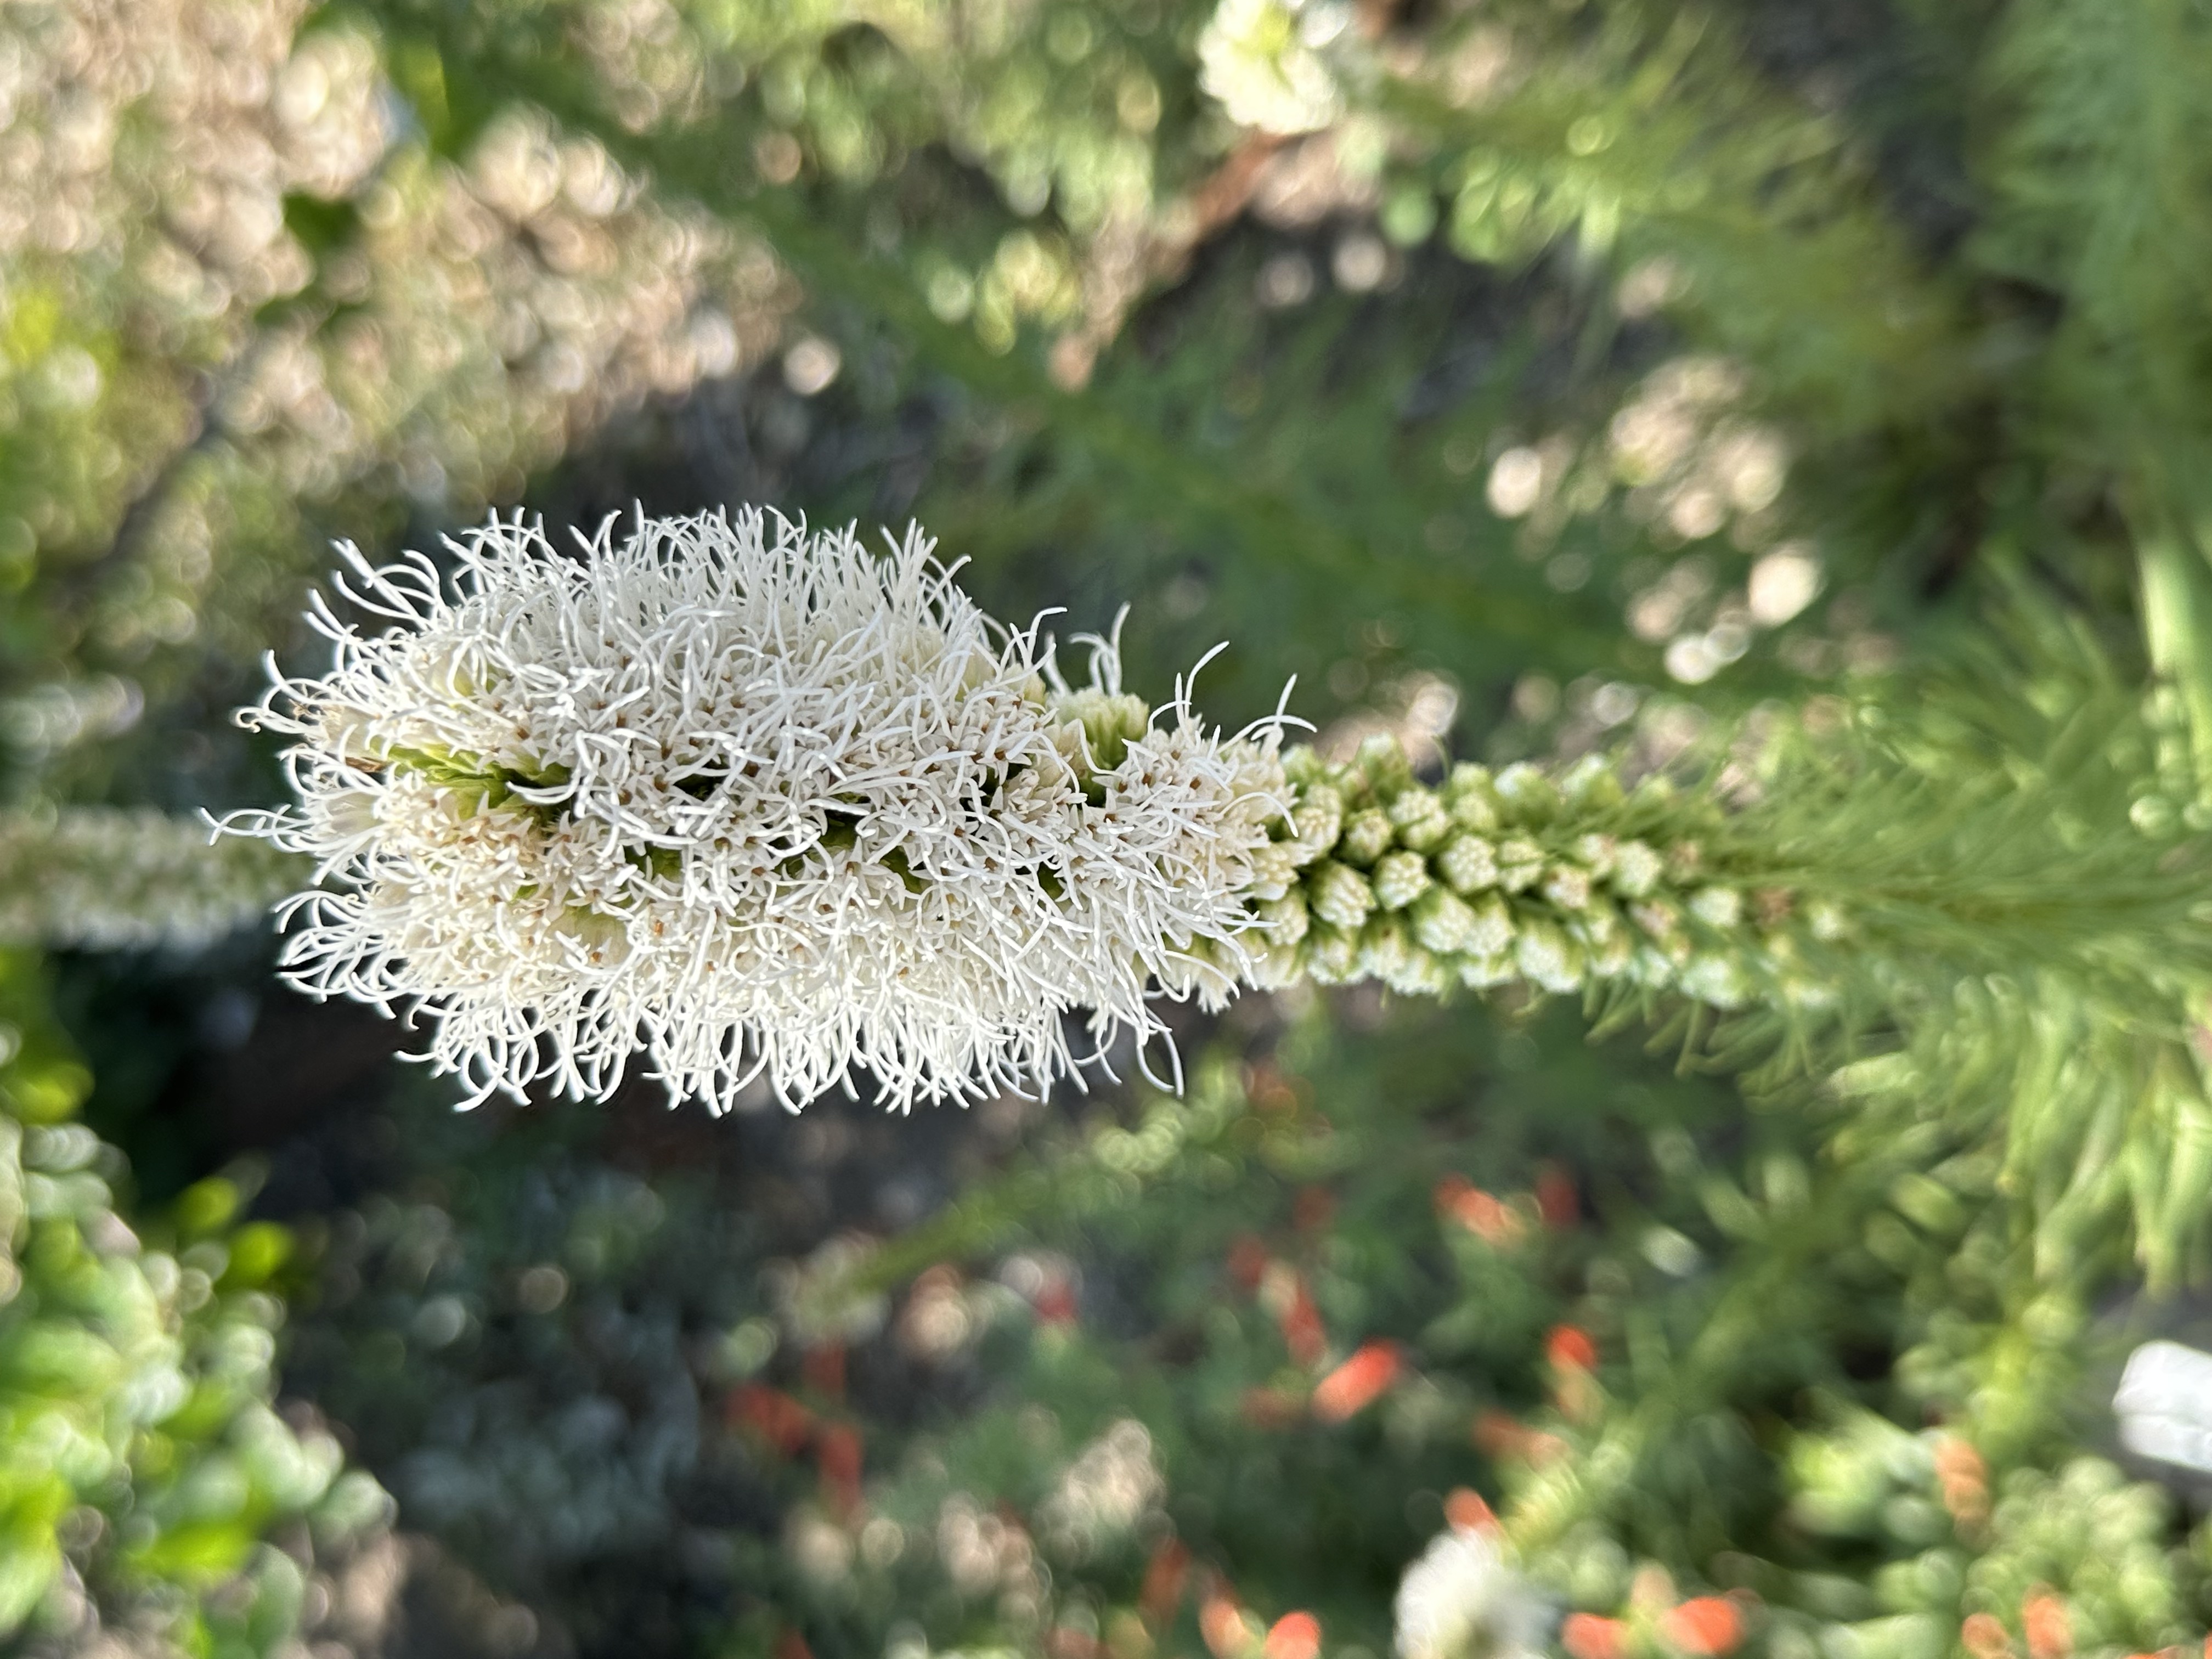 Liatrus have tall stems with spiky flowers at the end. 